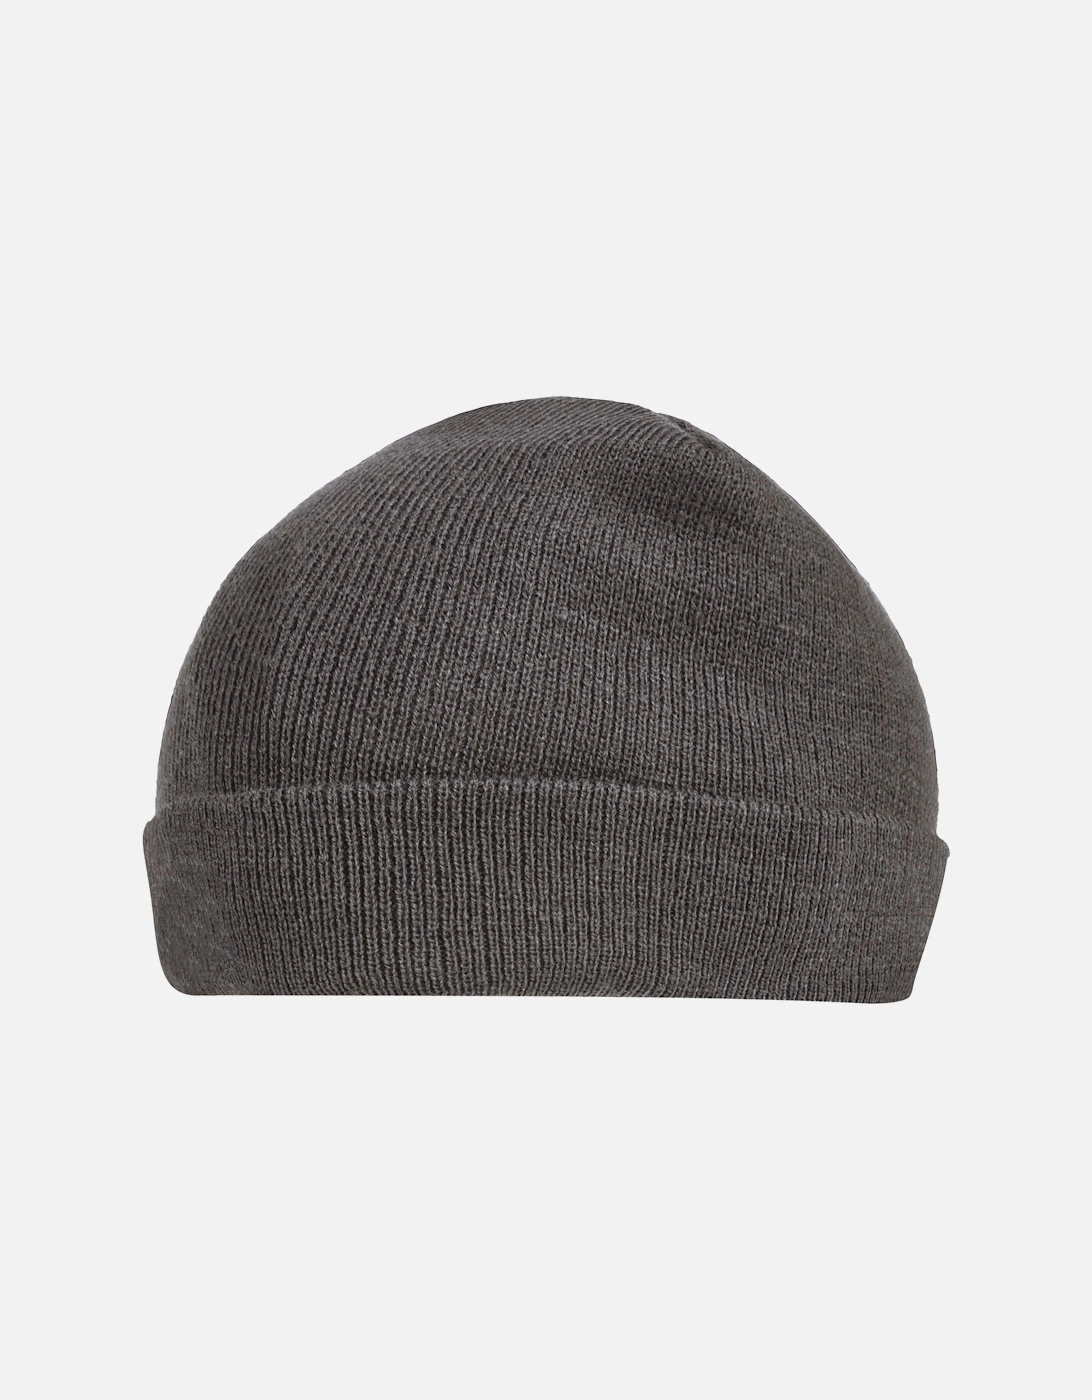 Unisex Thinsulate Lined Winter Hat